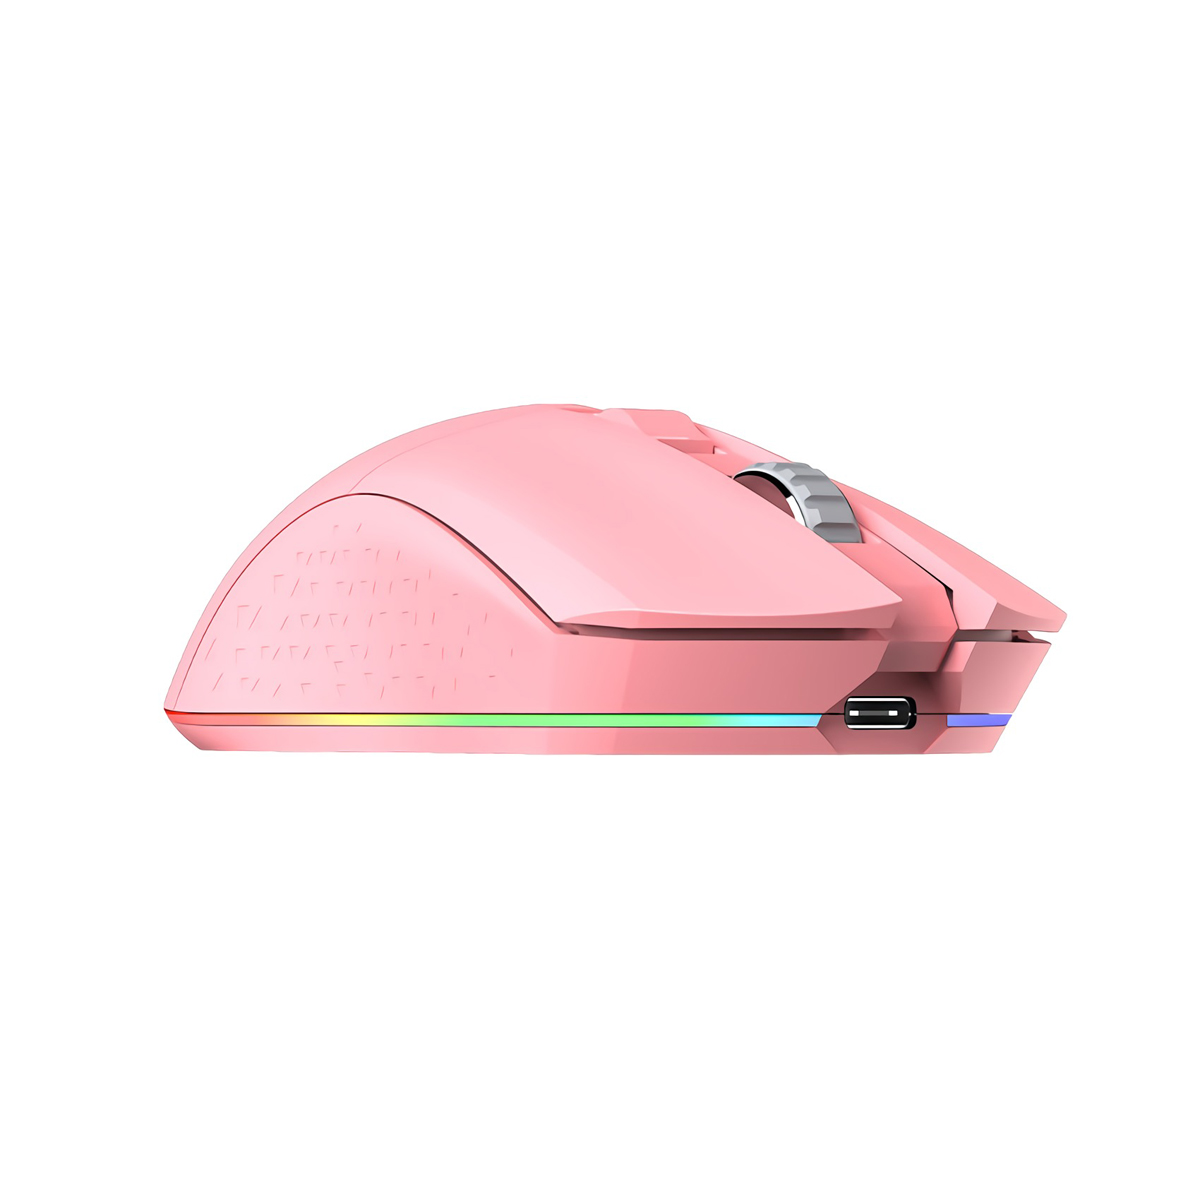 Find DAREU EM901 Dual Mode Mouse RGB 2 4GHz Wireless Wired Gaming Mouse Built in 930mAh Recharging Battery with Macro Set for PC Laptop for Sale on Gipsybee.com with cryptocurrencies